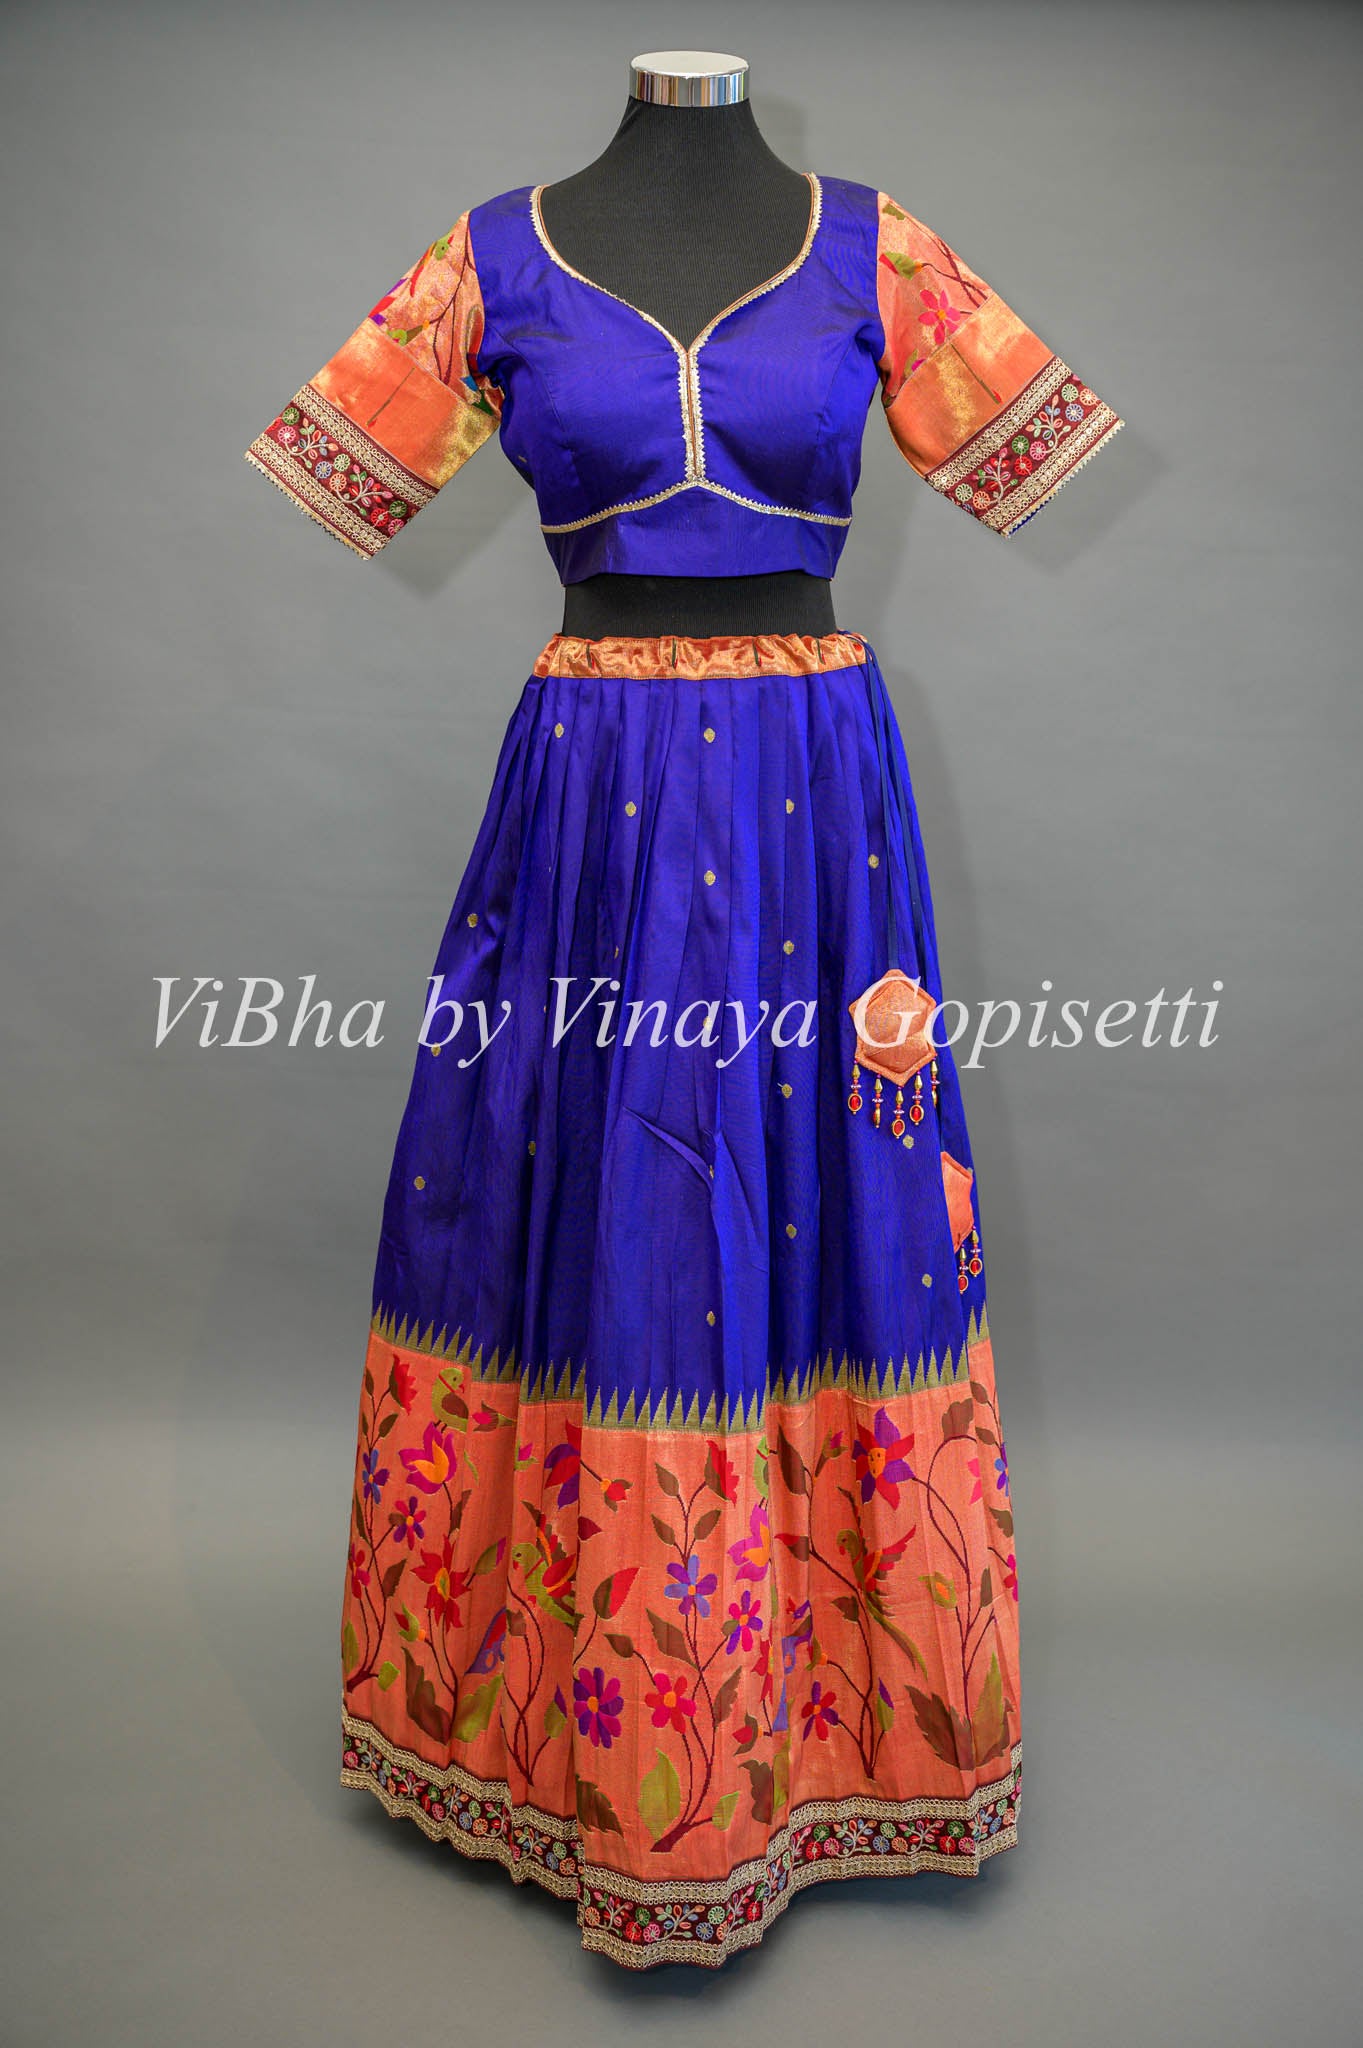 Magnificent Royal Blue Gold and Pink Indian Wedding Lehenga-SNT11127 –  Saris and Things